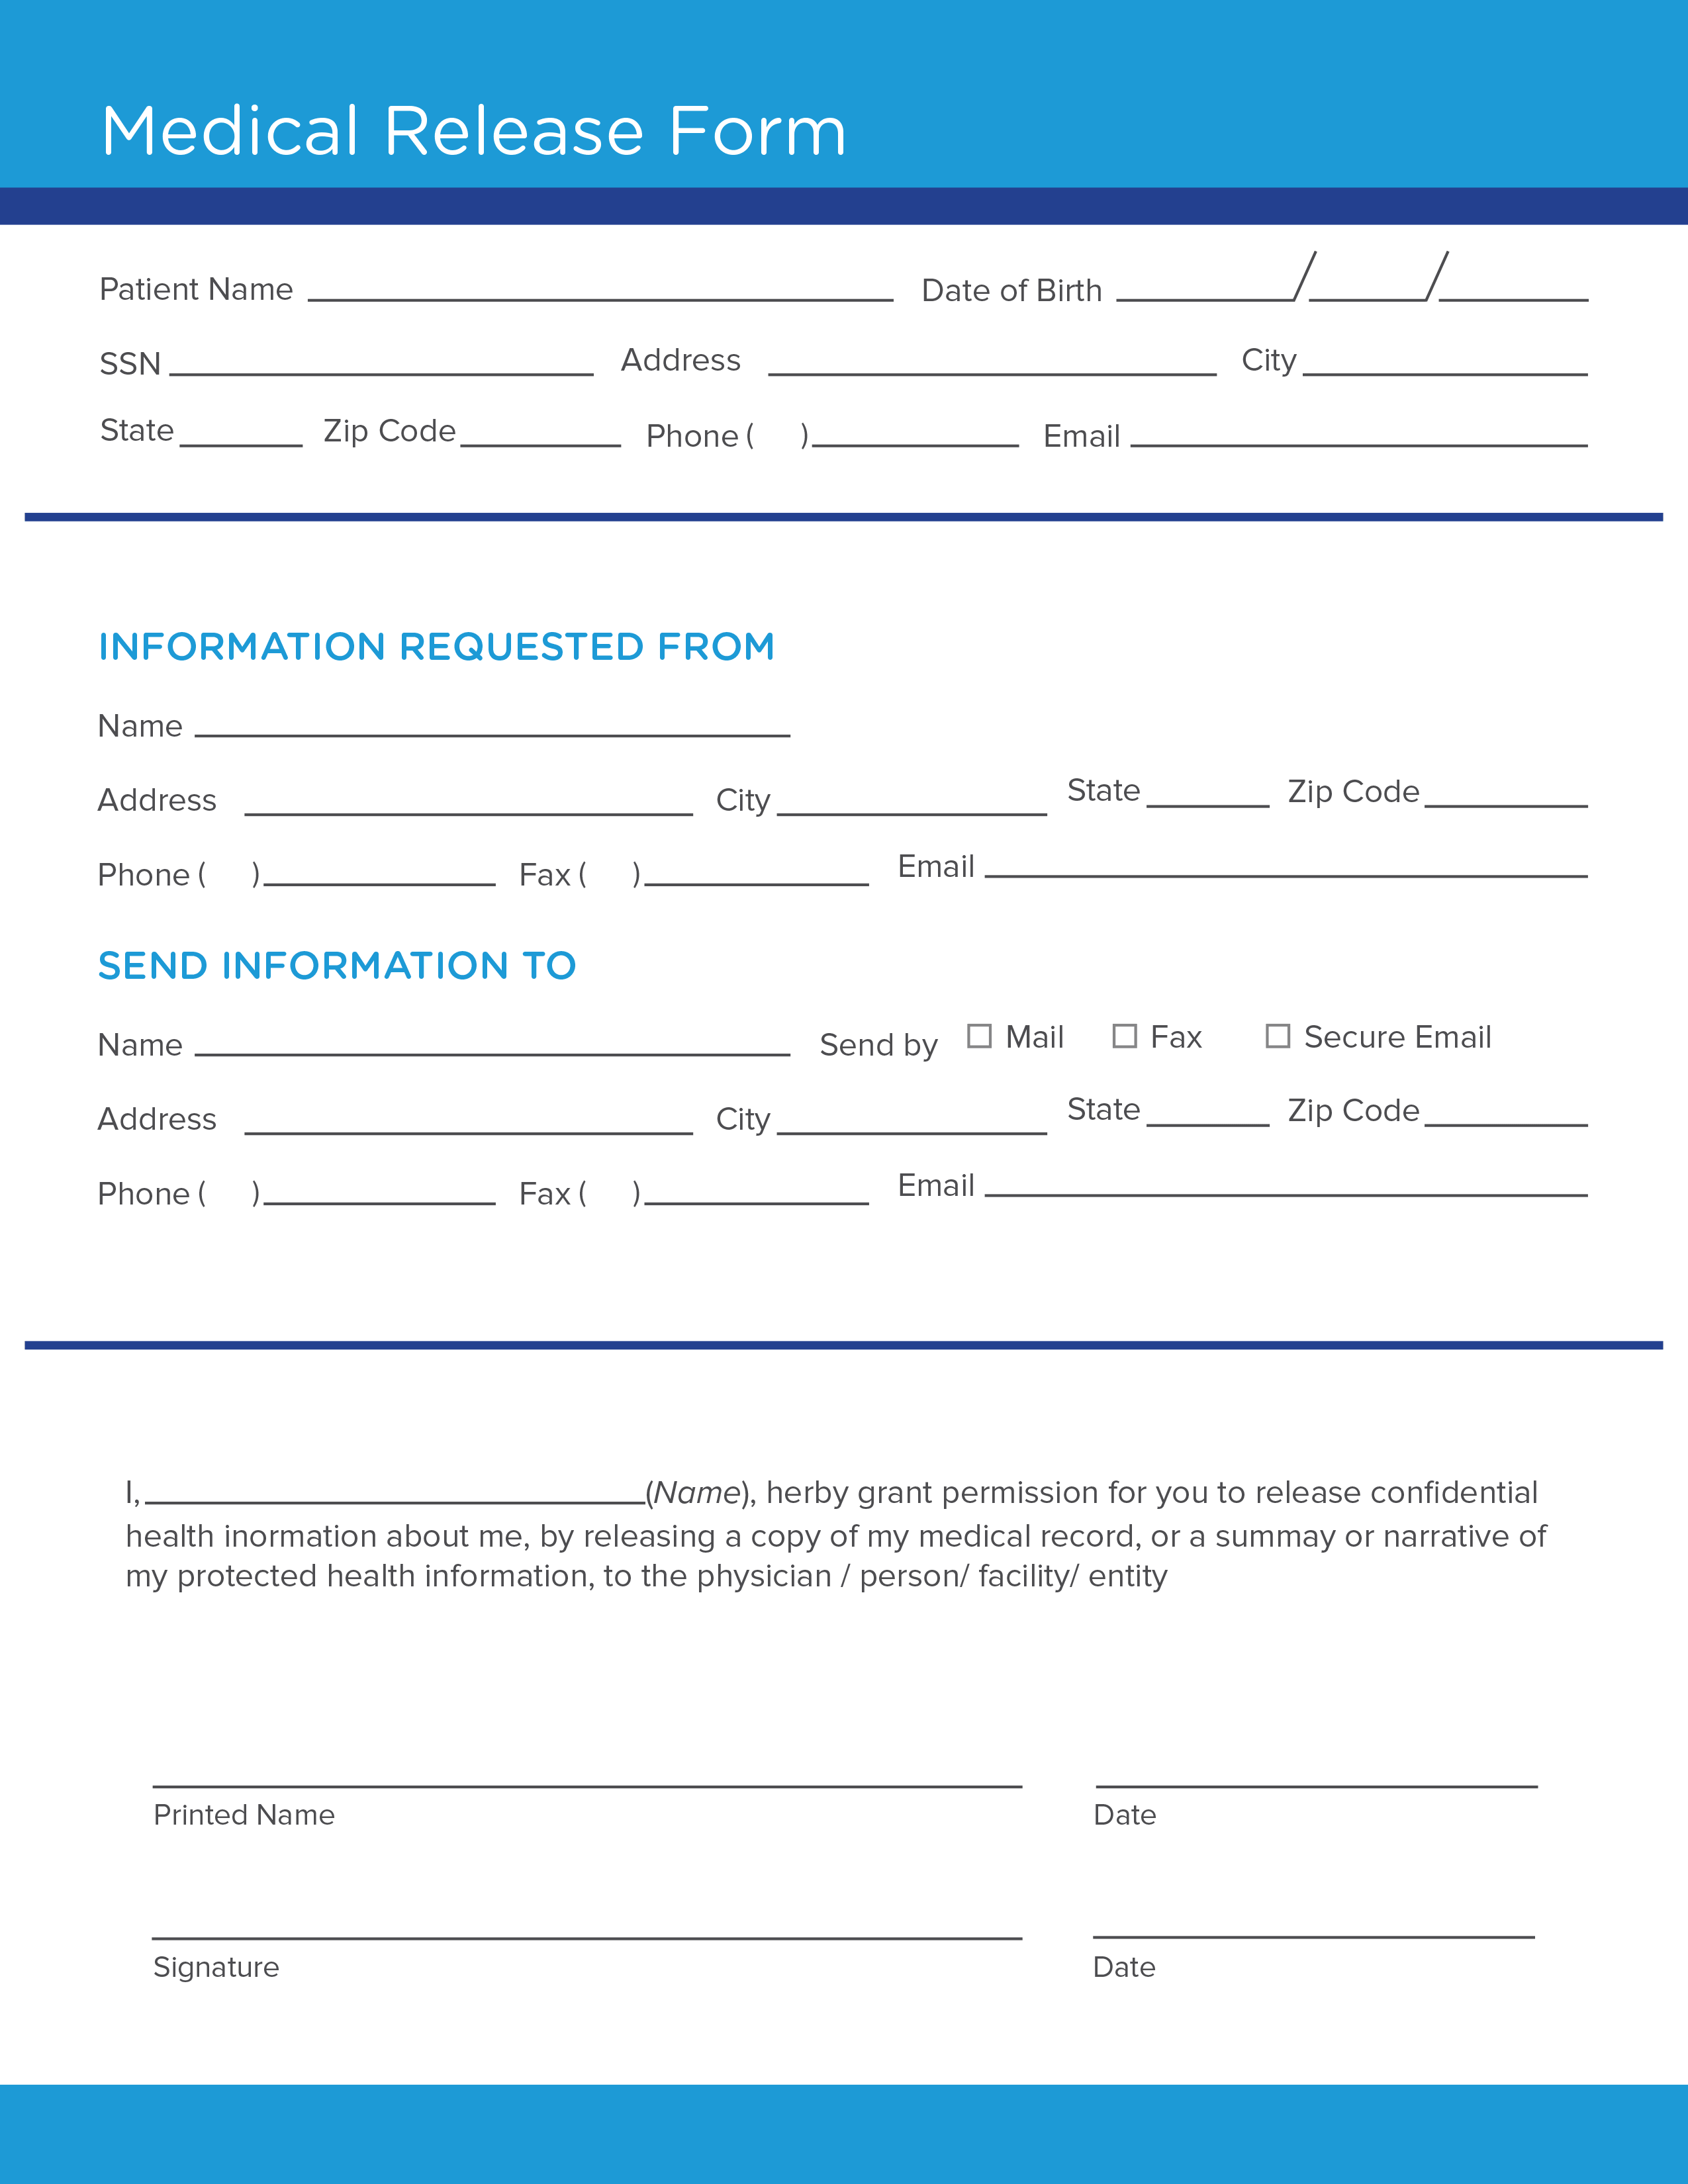 free-medical-release-form-template-continuum